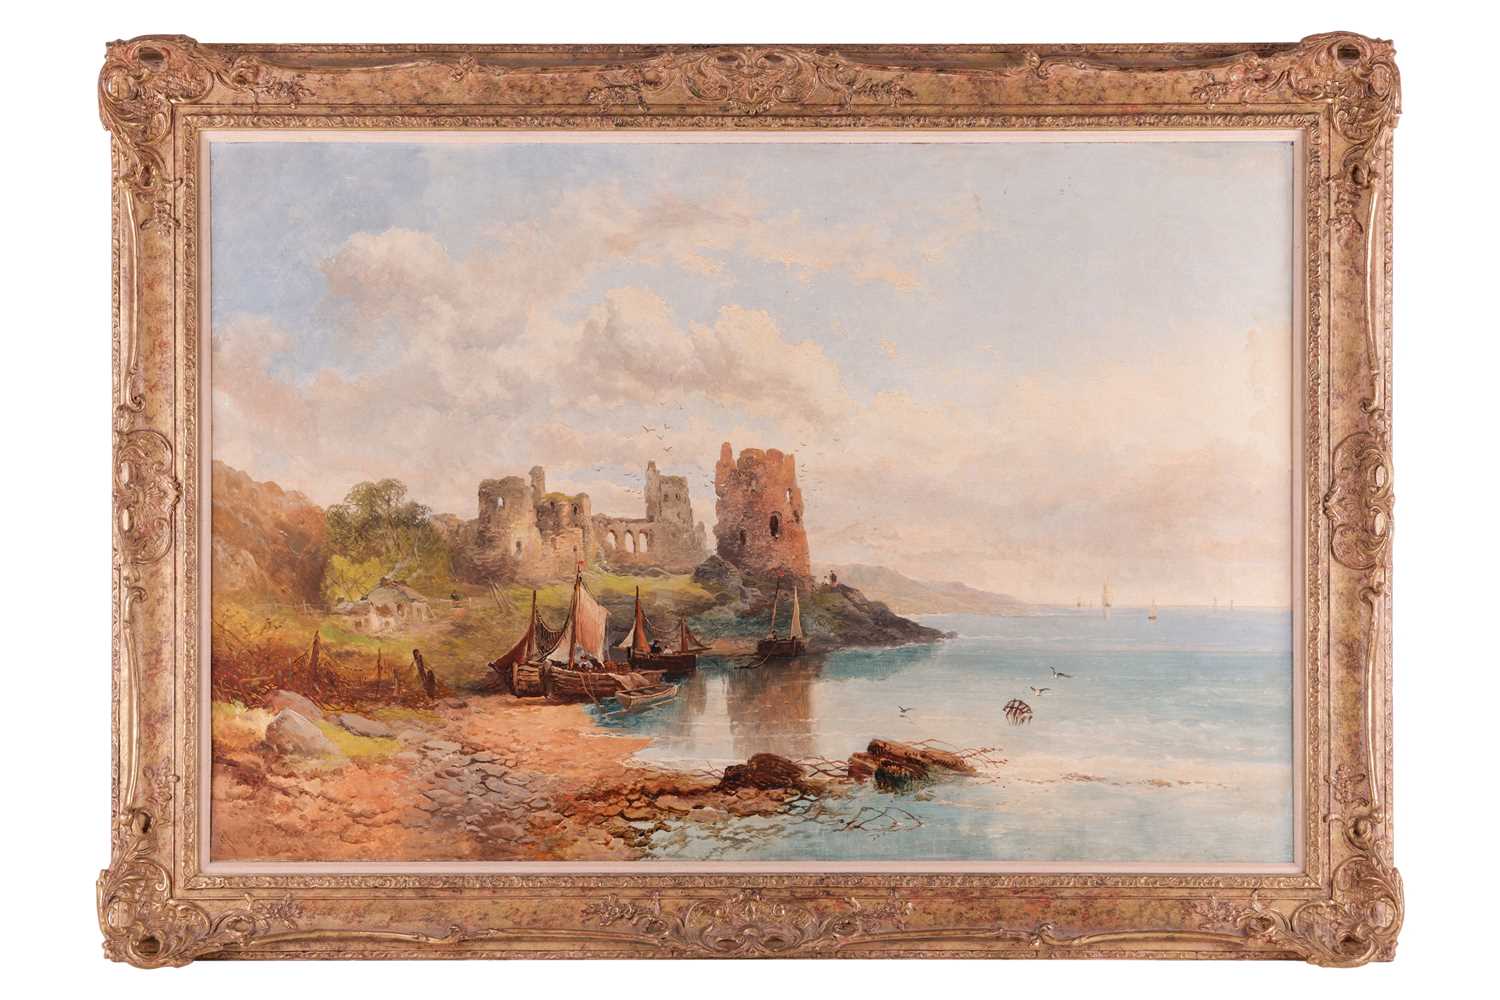 Joseph Horlor (1809 - 1887), Coastal view with ruined castle, signed J.Horlor (lower left), oil on c